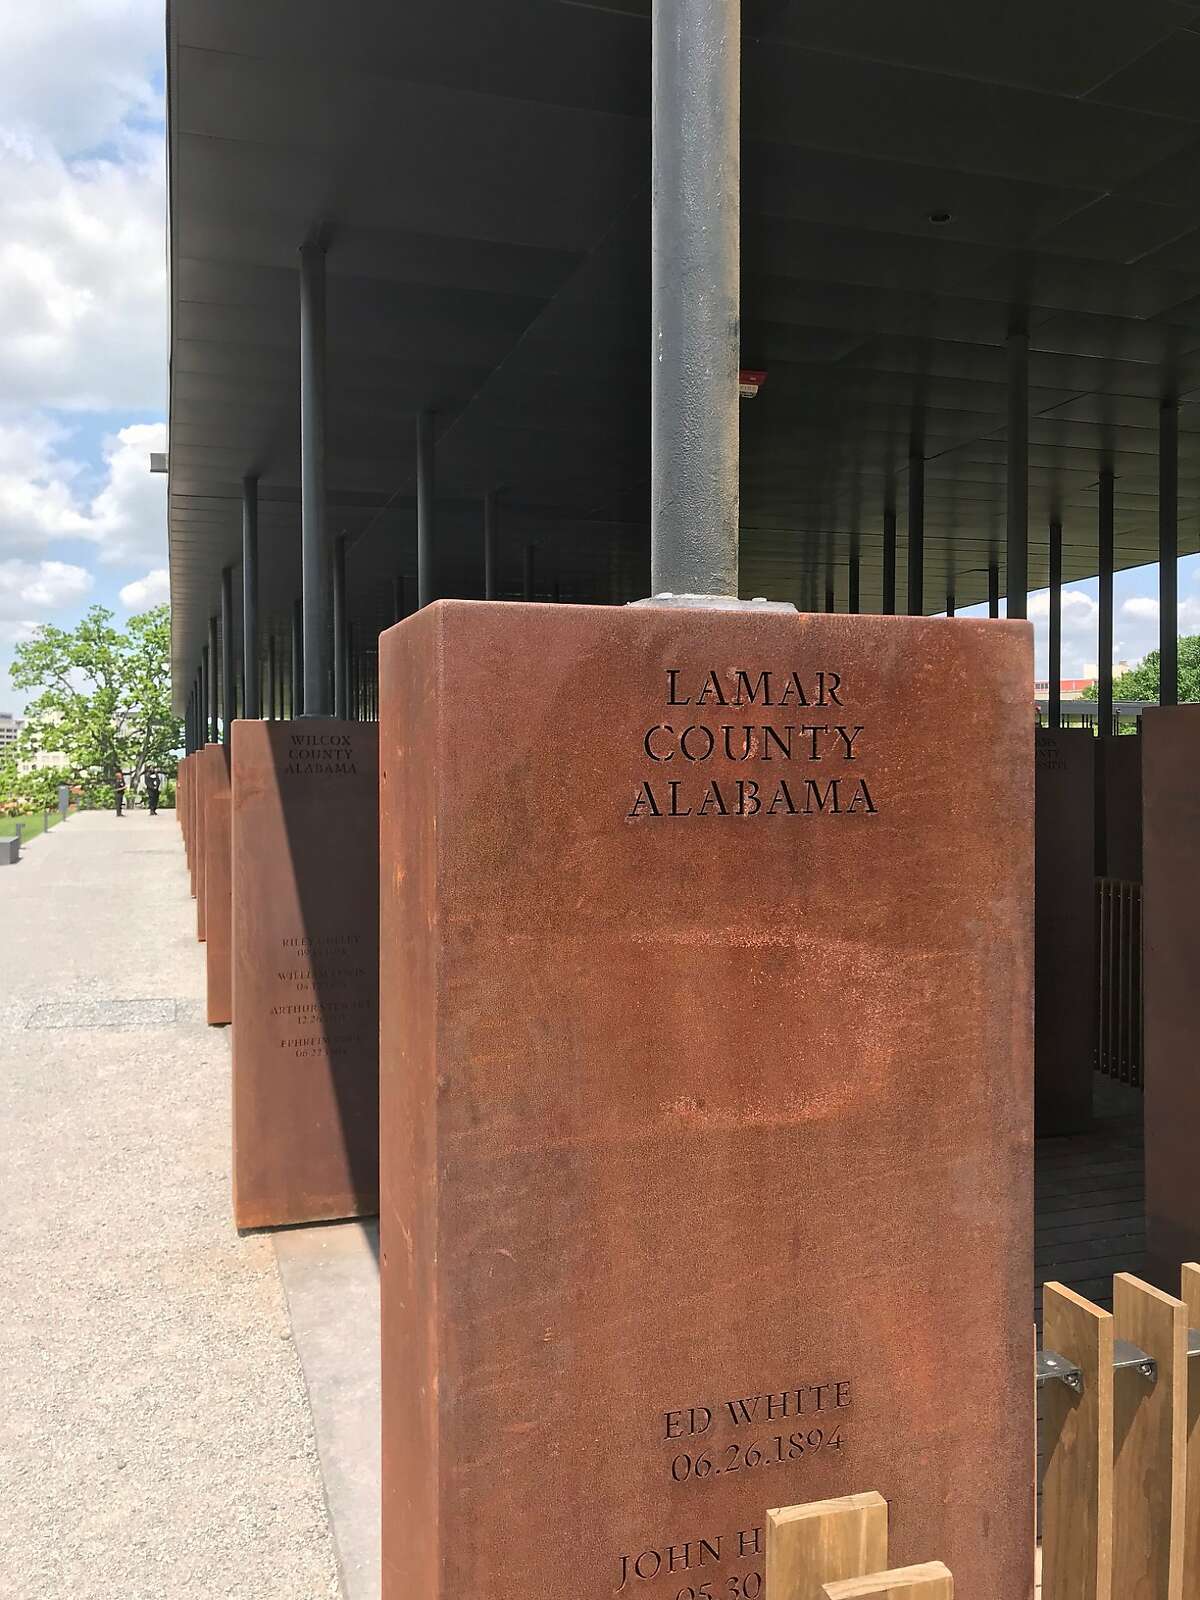 Photographer: Ian MagruderDate: April 27, 2018Place: National Memorial for Peace and Justice, the nation�s first memorial dedicated to the legacy of enslaved black peopleMontgomery, AlabamaThe memorial structure on the center of the site is constructed of over 800 corten steel monuments, one for each county in the United States where a racial terror lynching took place. The names of the lynching victims are engraved in the columns, along with the date of the lynching.